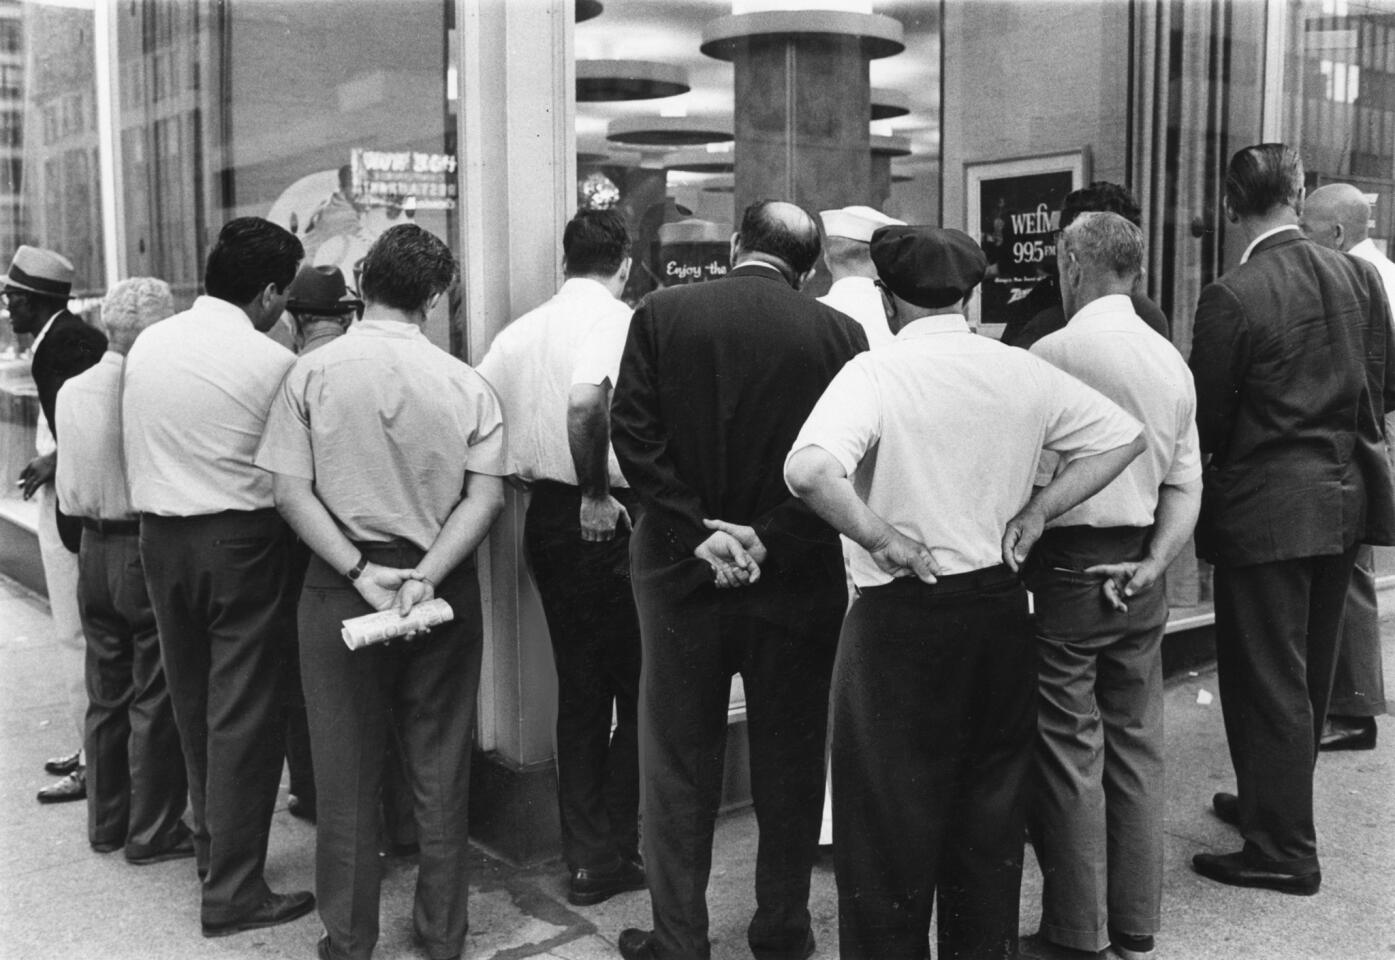 Spectators crowd around a display window of a Chicago store on July 20, 1969 at Michigan Avenue and Lake Street to watch television sets as Apollo 11 astronauts prepare to step on the moon. (William Bender/Chicago Tribune)